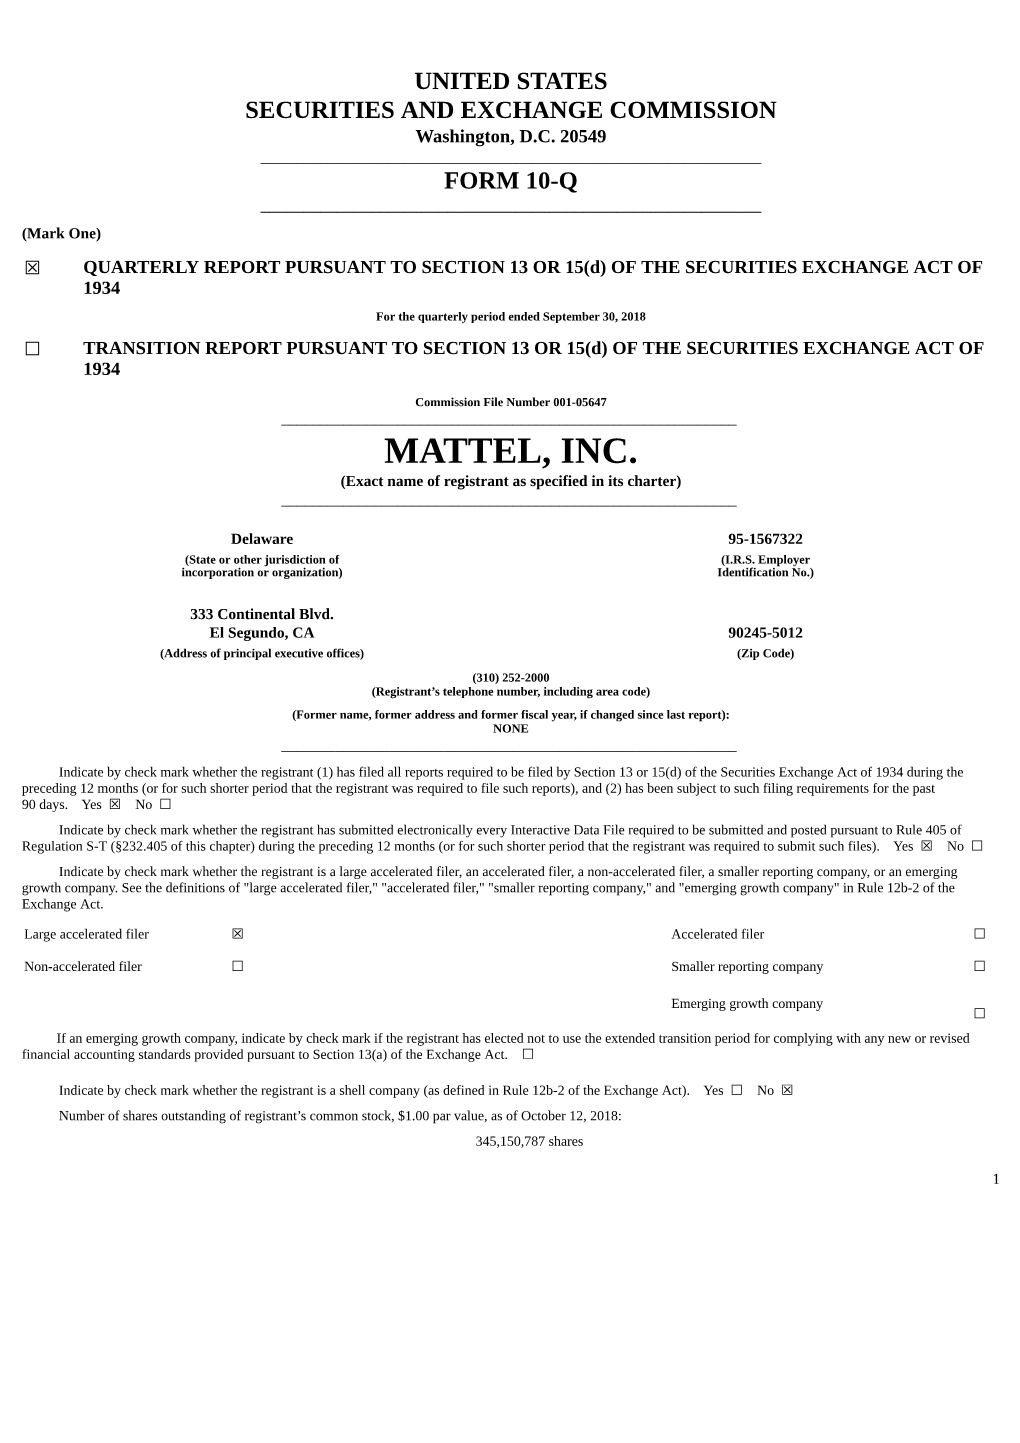 MATTEL, INC. (Exact Name of Registrant As Specified in Its Charter) ______